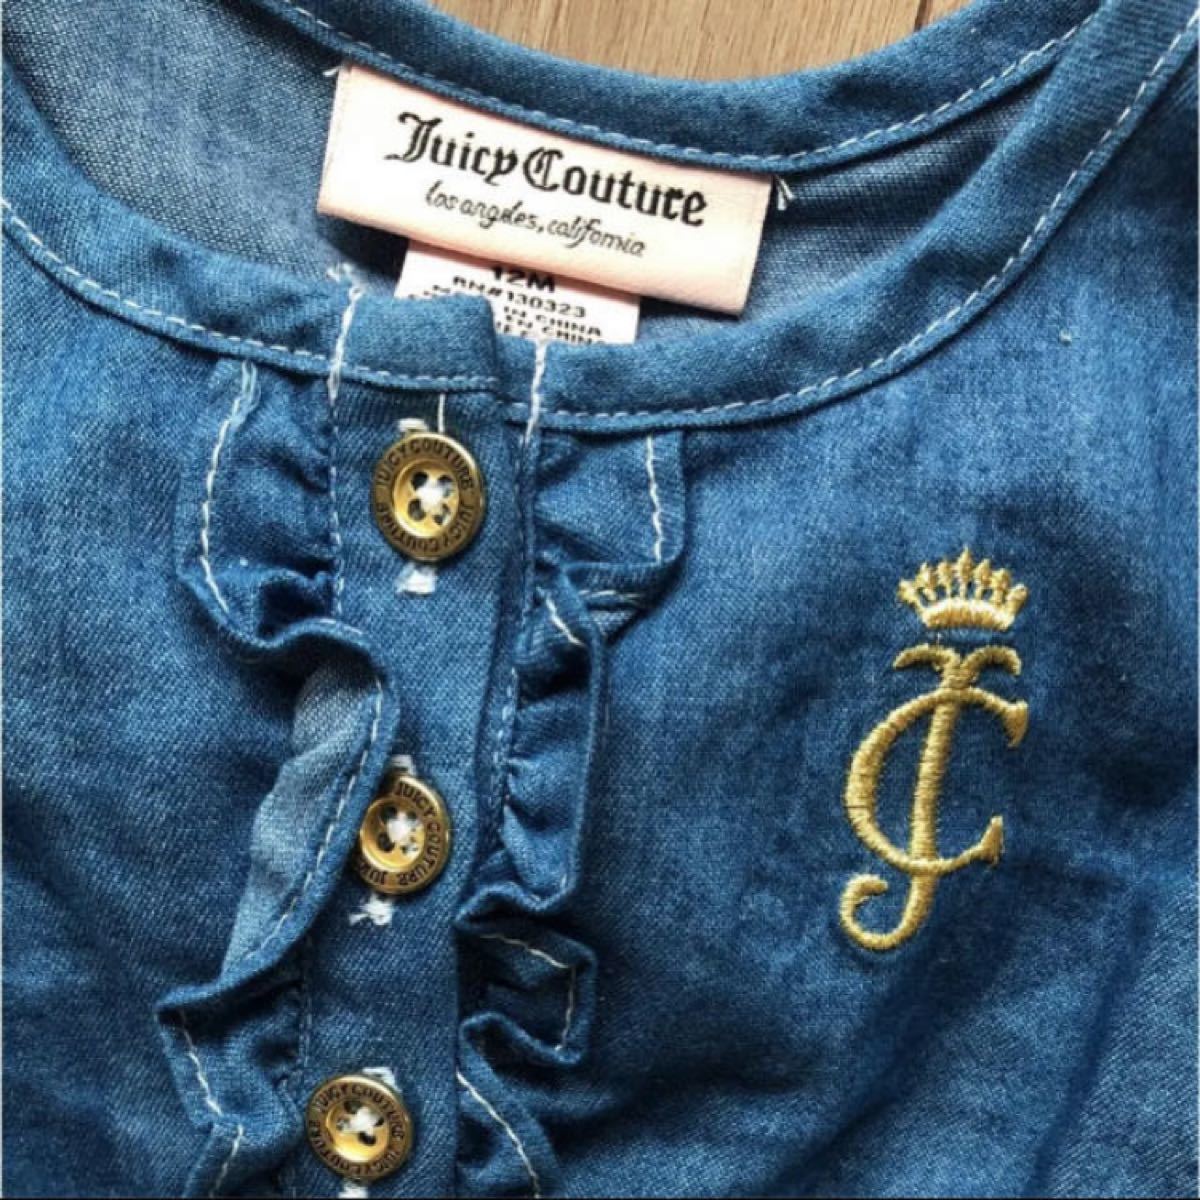 Juicy Couture ワンピース&スパッツセット　12M